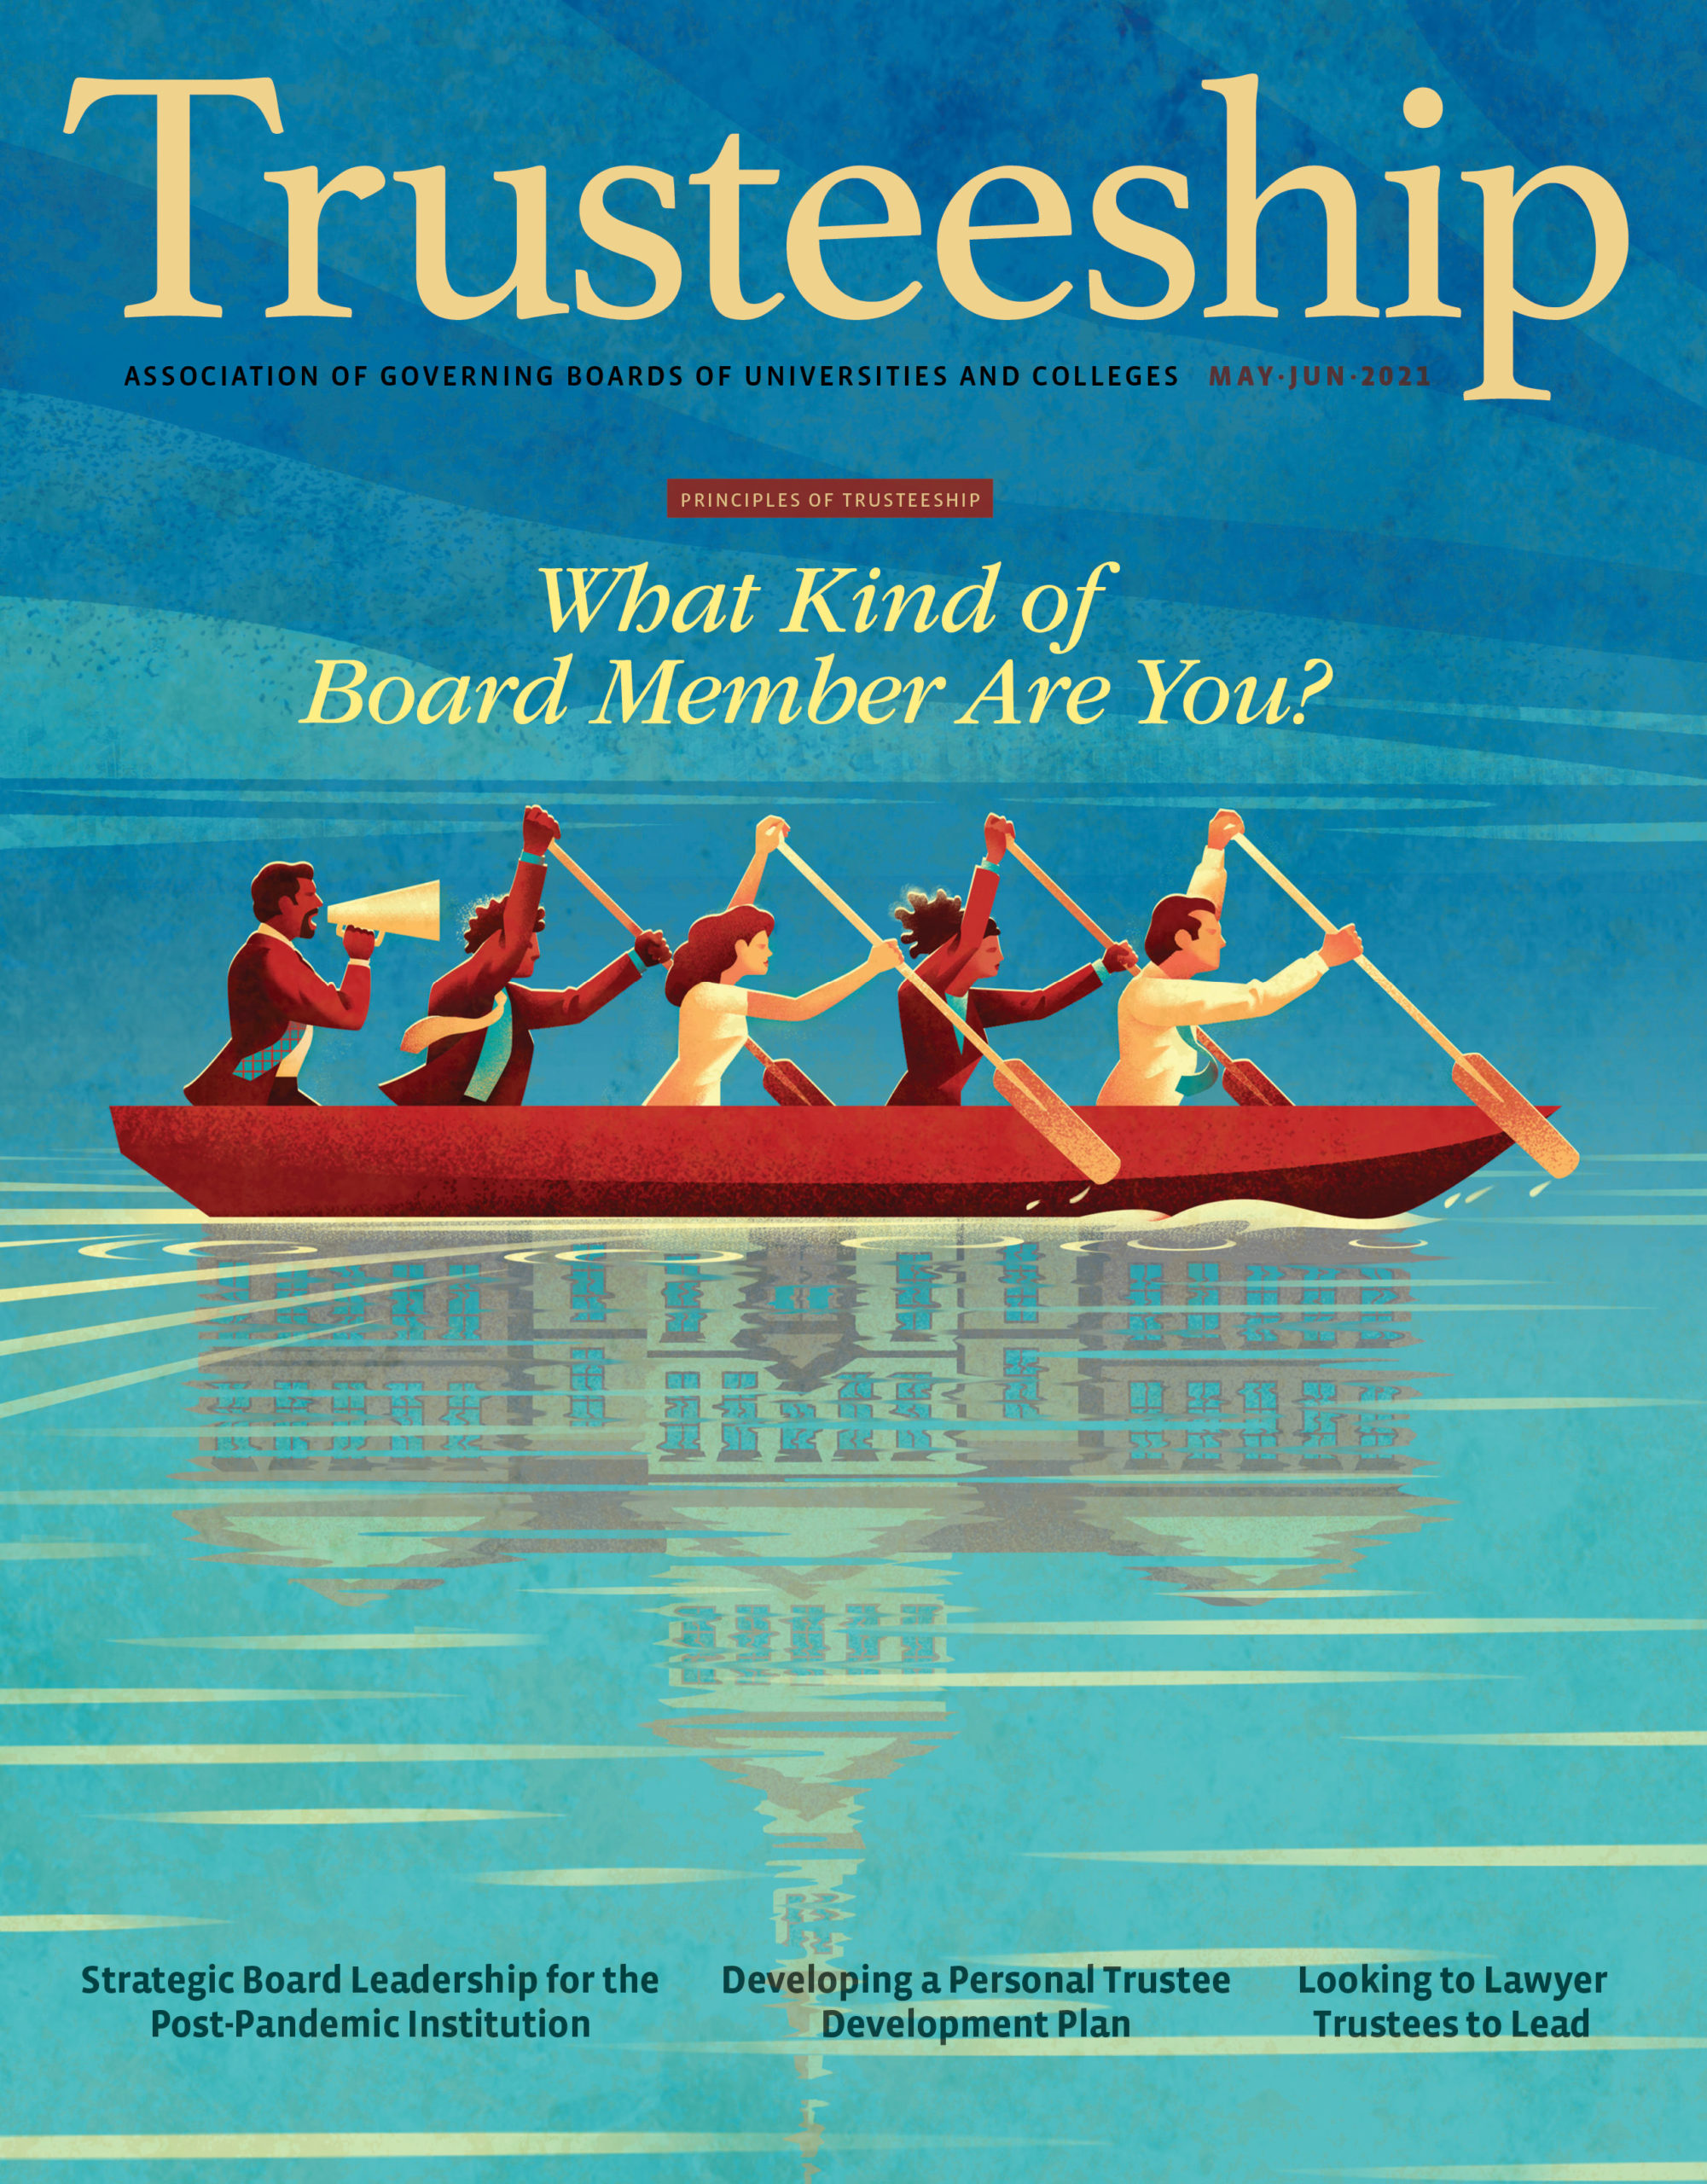 AGB Trusteeship Magazine May/June 2021 with cover article "What Kind of Board Member Are You?